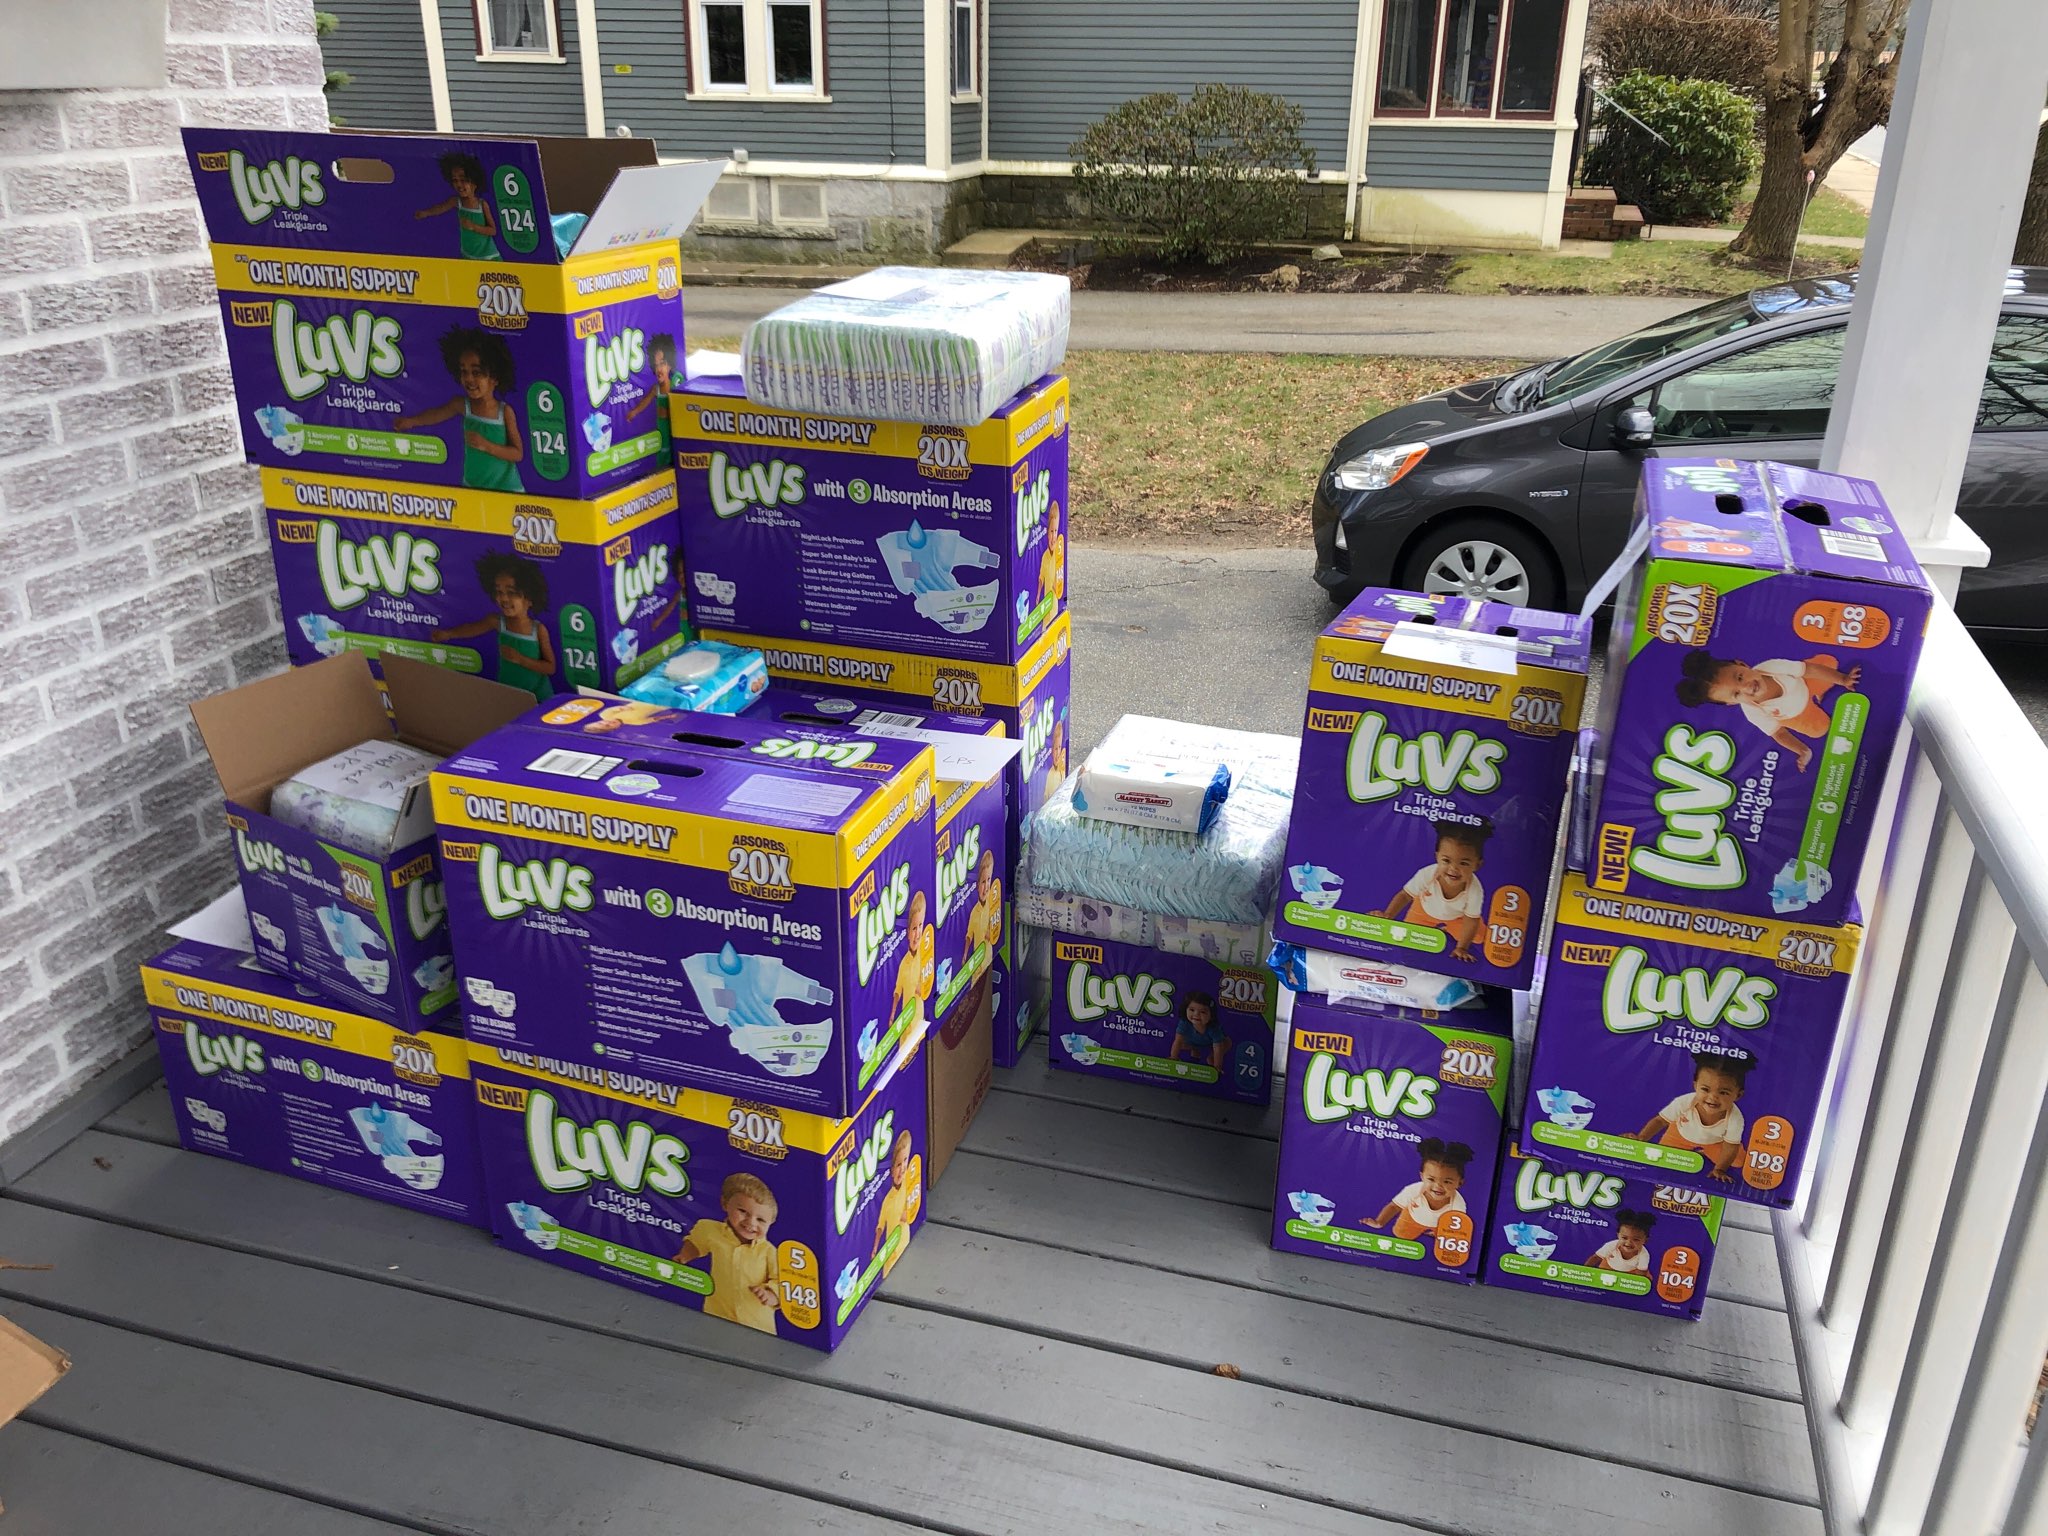 Boxes of diapers donated for those in need